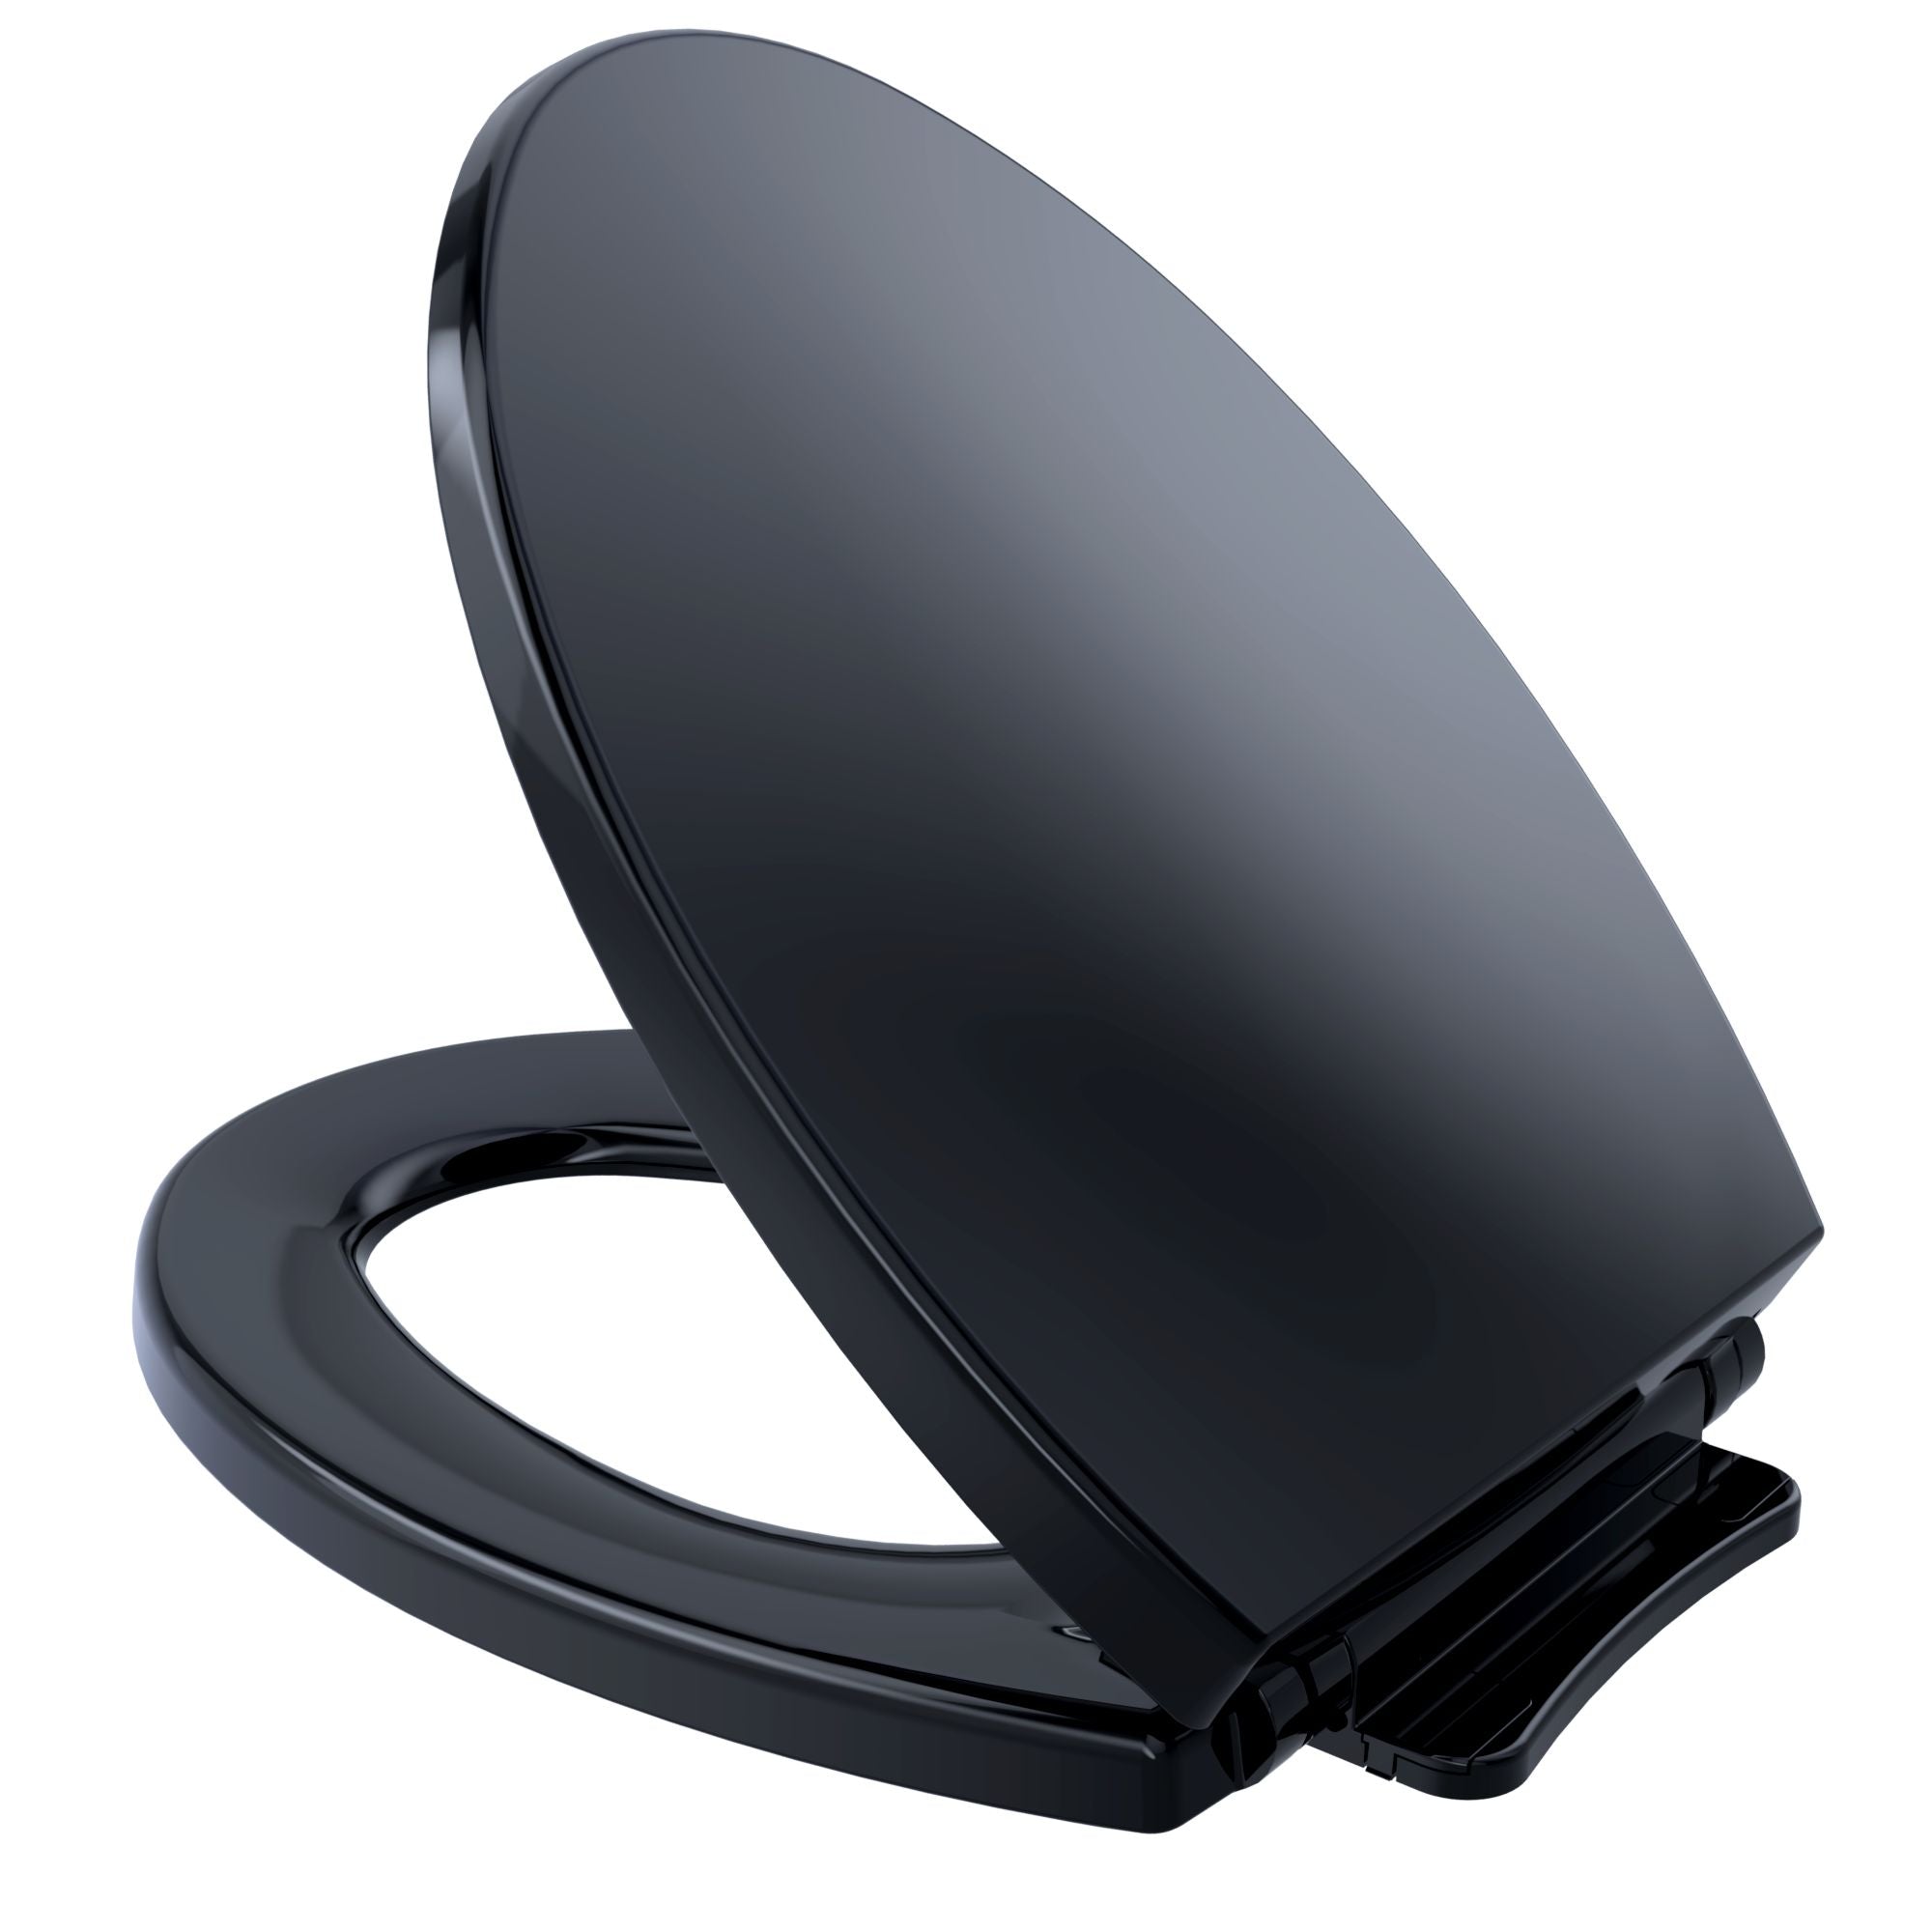 Toto Softclose Toilet Seat - Elongated